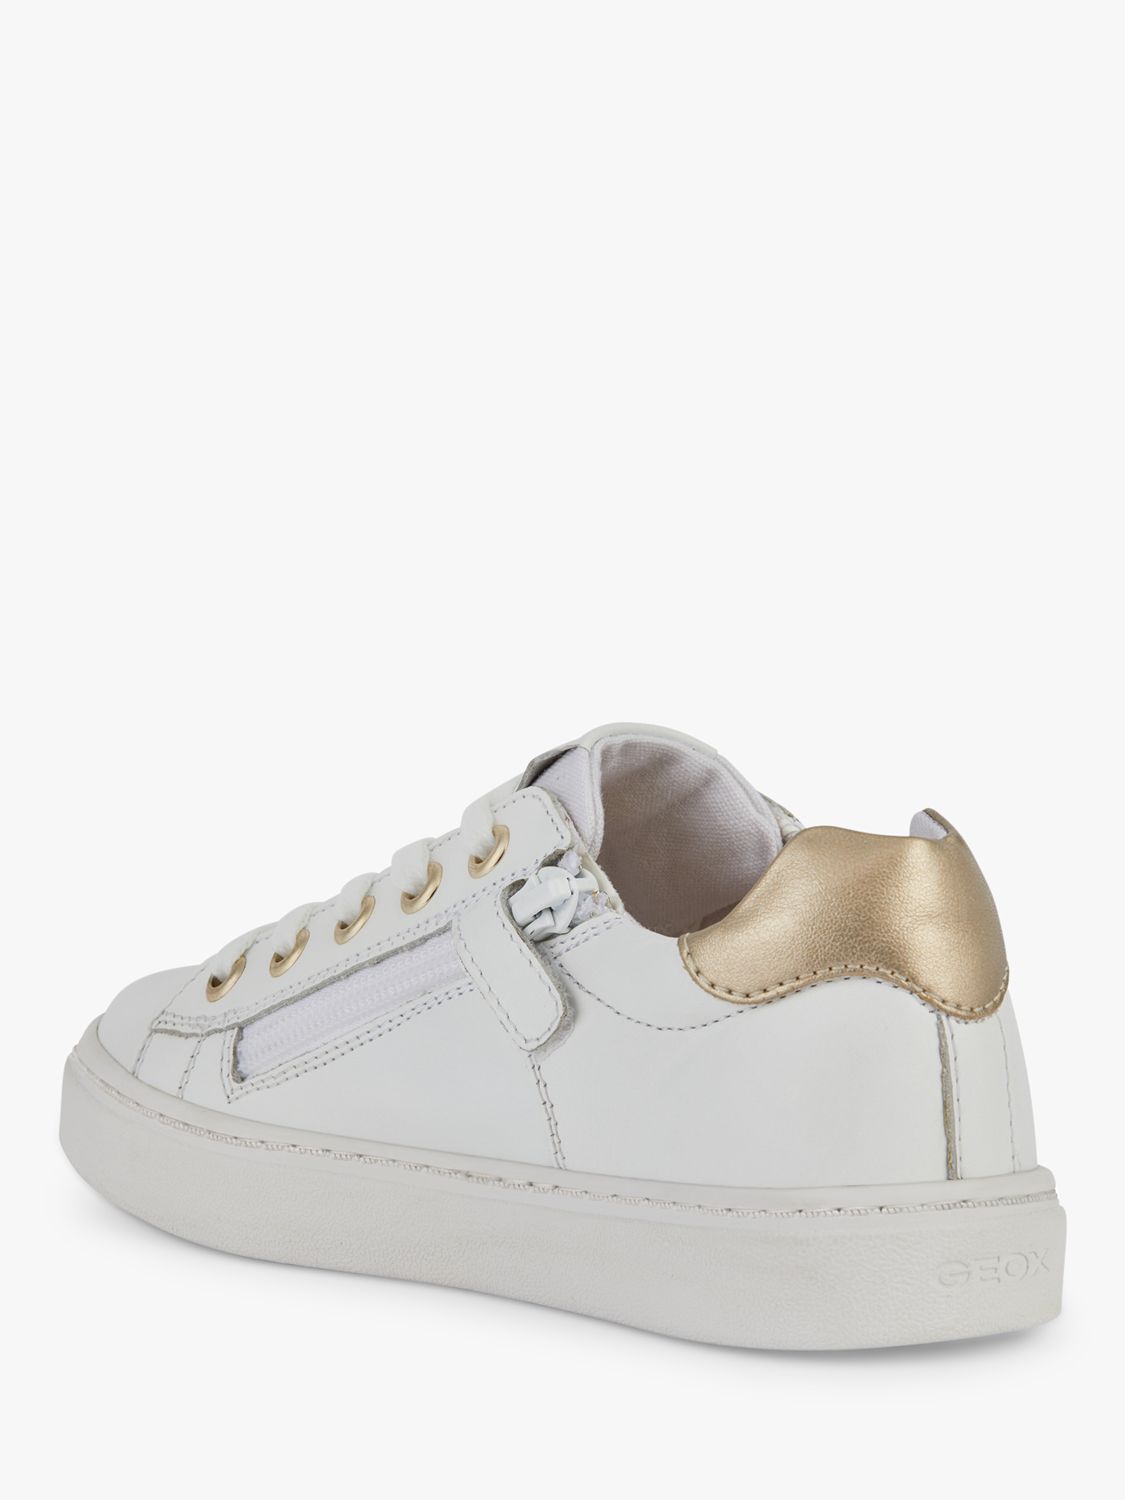 Geox Kids' Nashik Leather Blend Lace Up Trainers, White/Gold, EU33